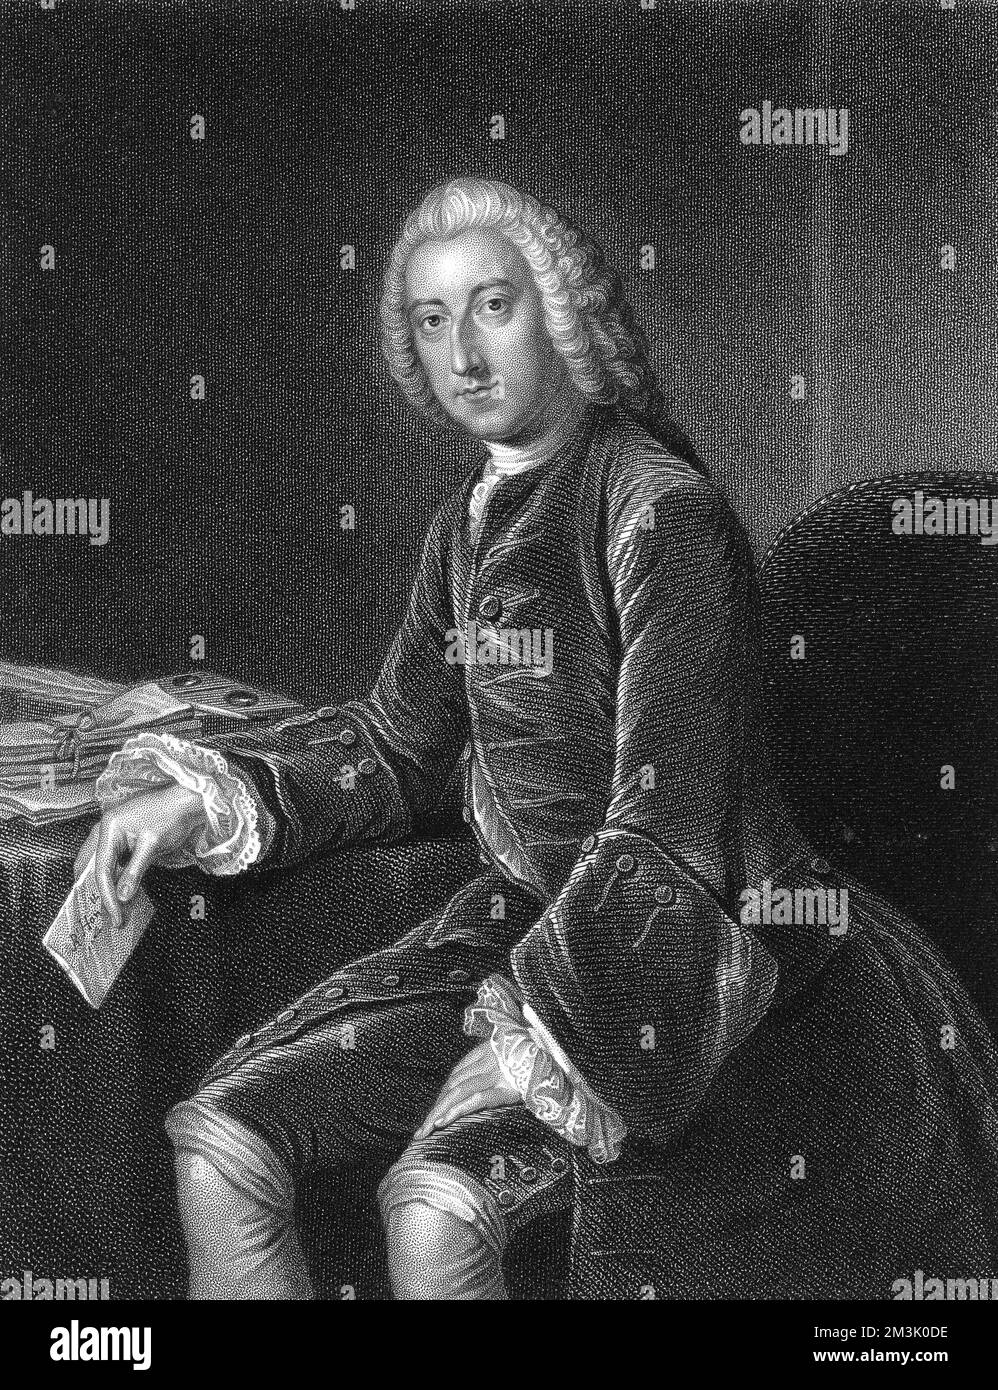 of William Pitt, 1st Earl of Chatham (1708 - 1778), English Statesman and orator who came to be known as Pitt the Elder. His second son was William Pitt (the Younger), who became British Prime Minister when aged only 24. Stock Photo